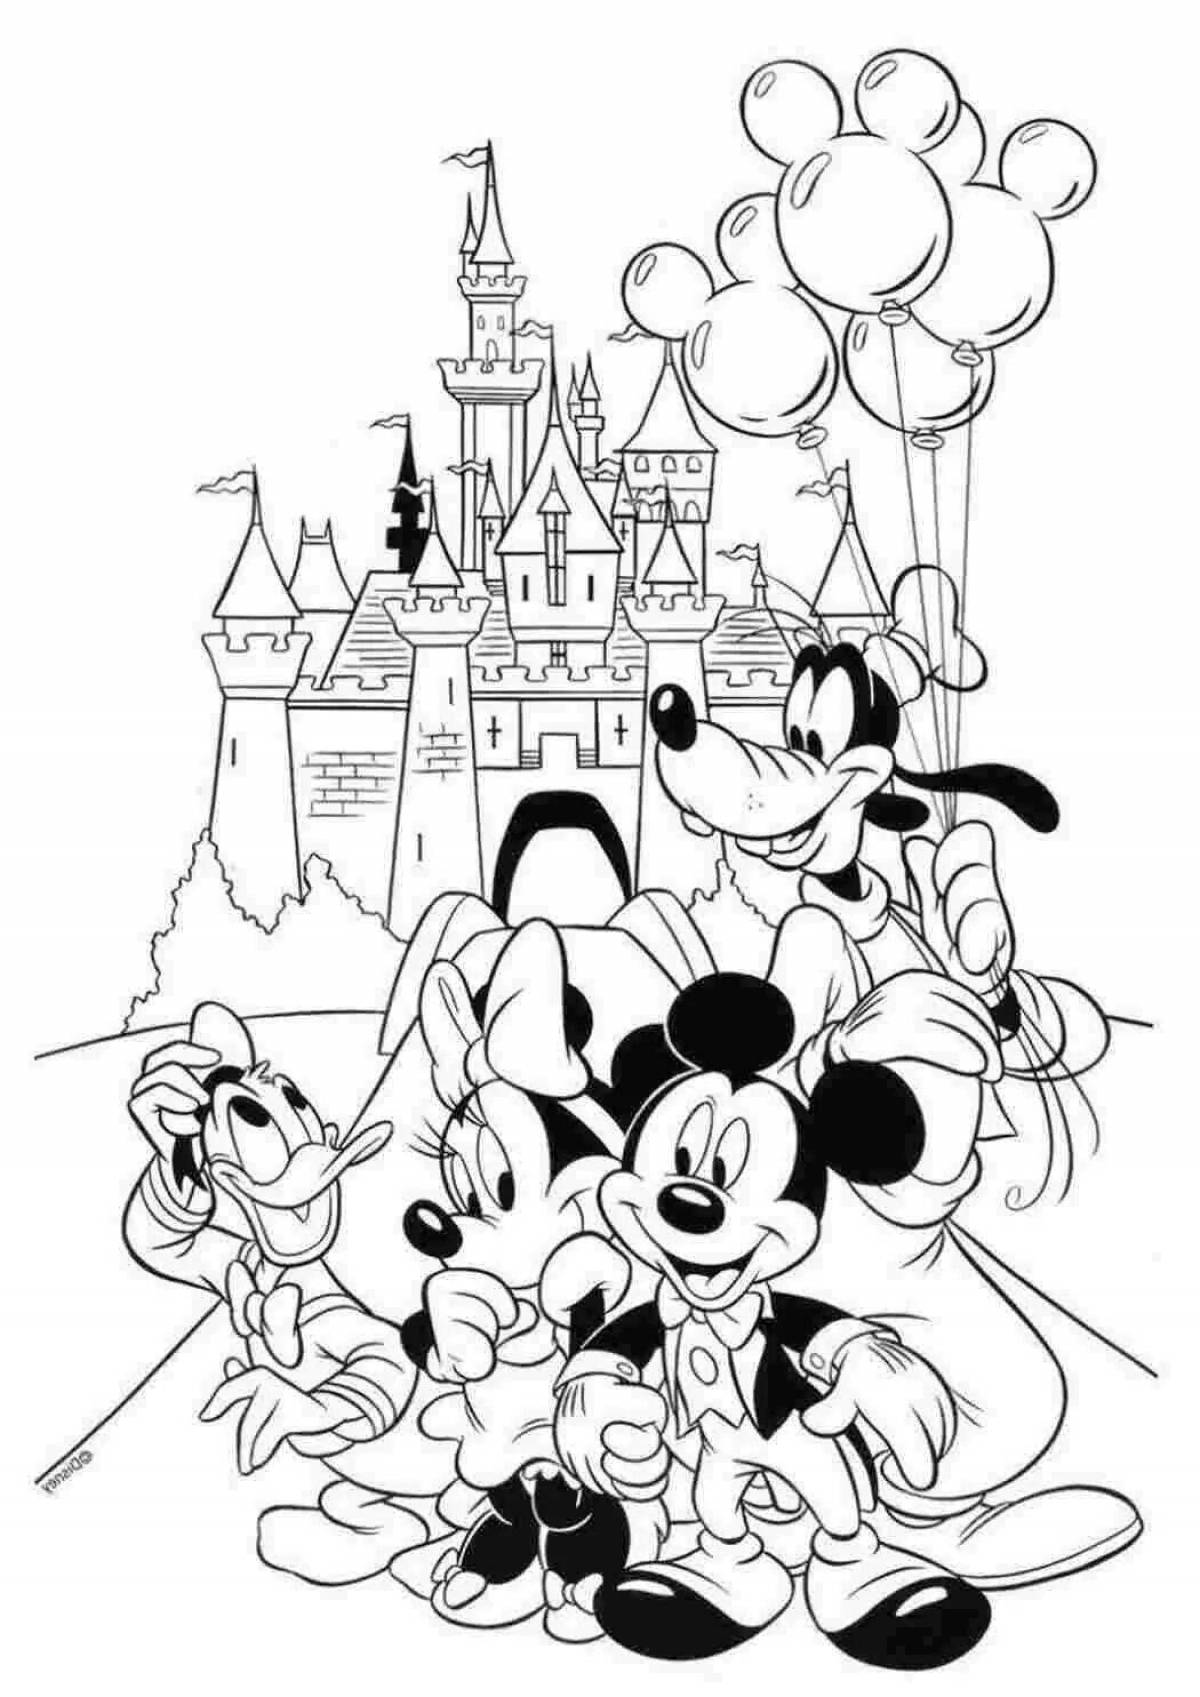 Coloring pages of disney characters